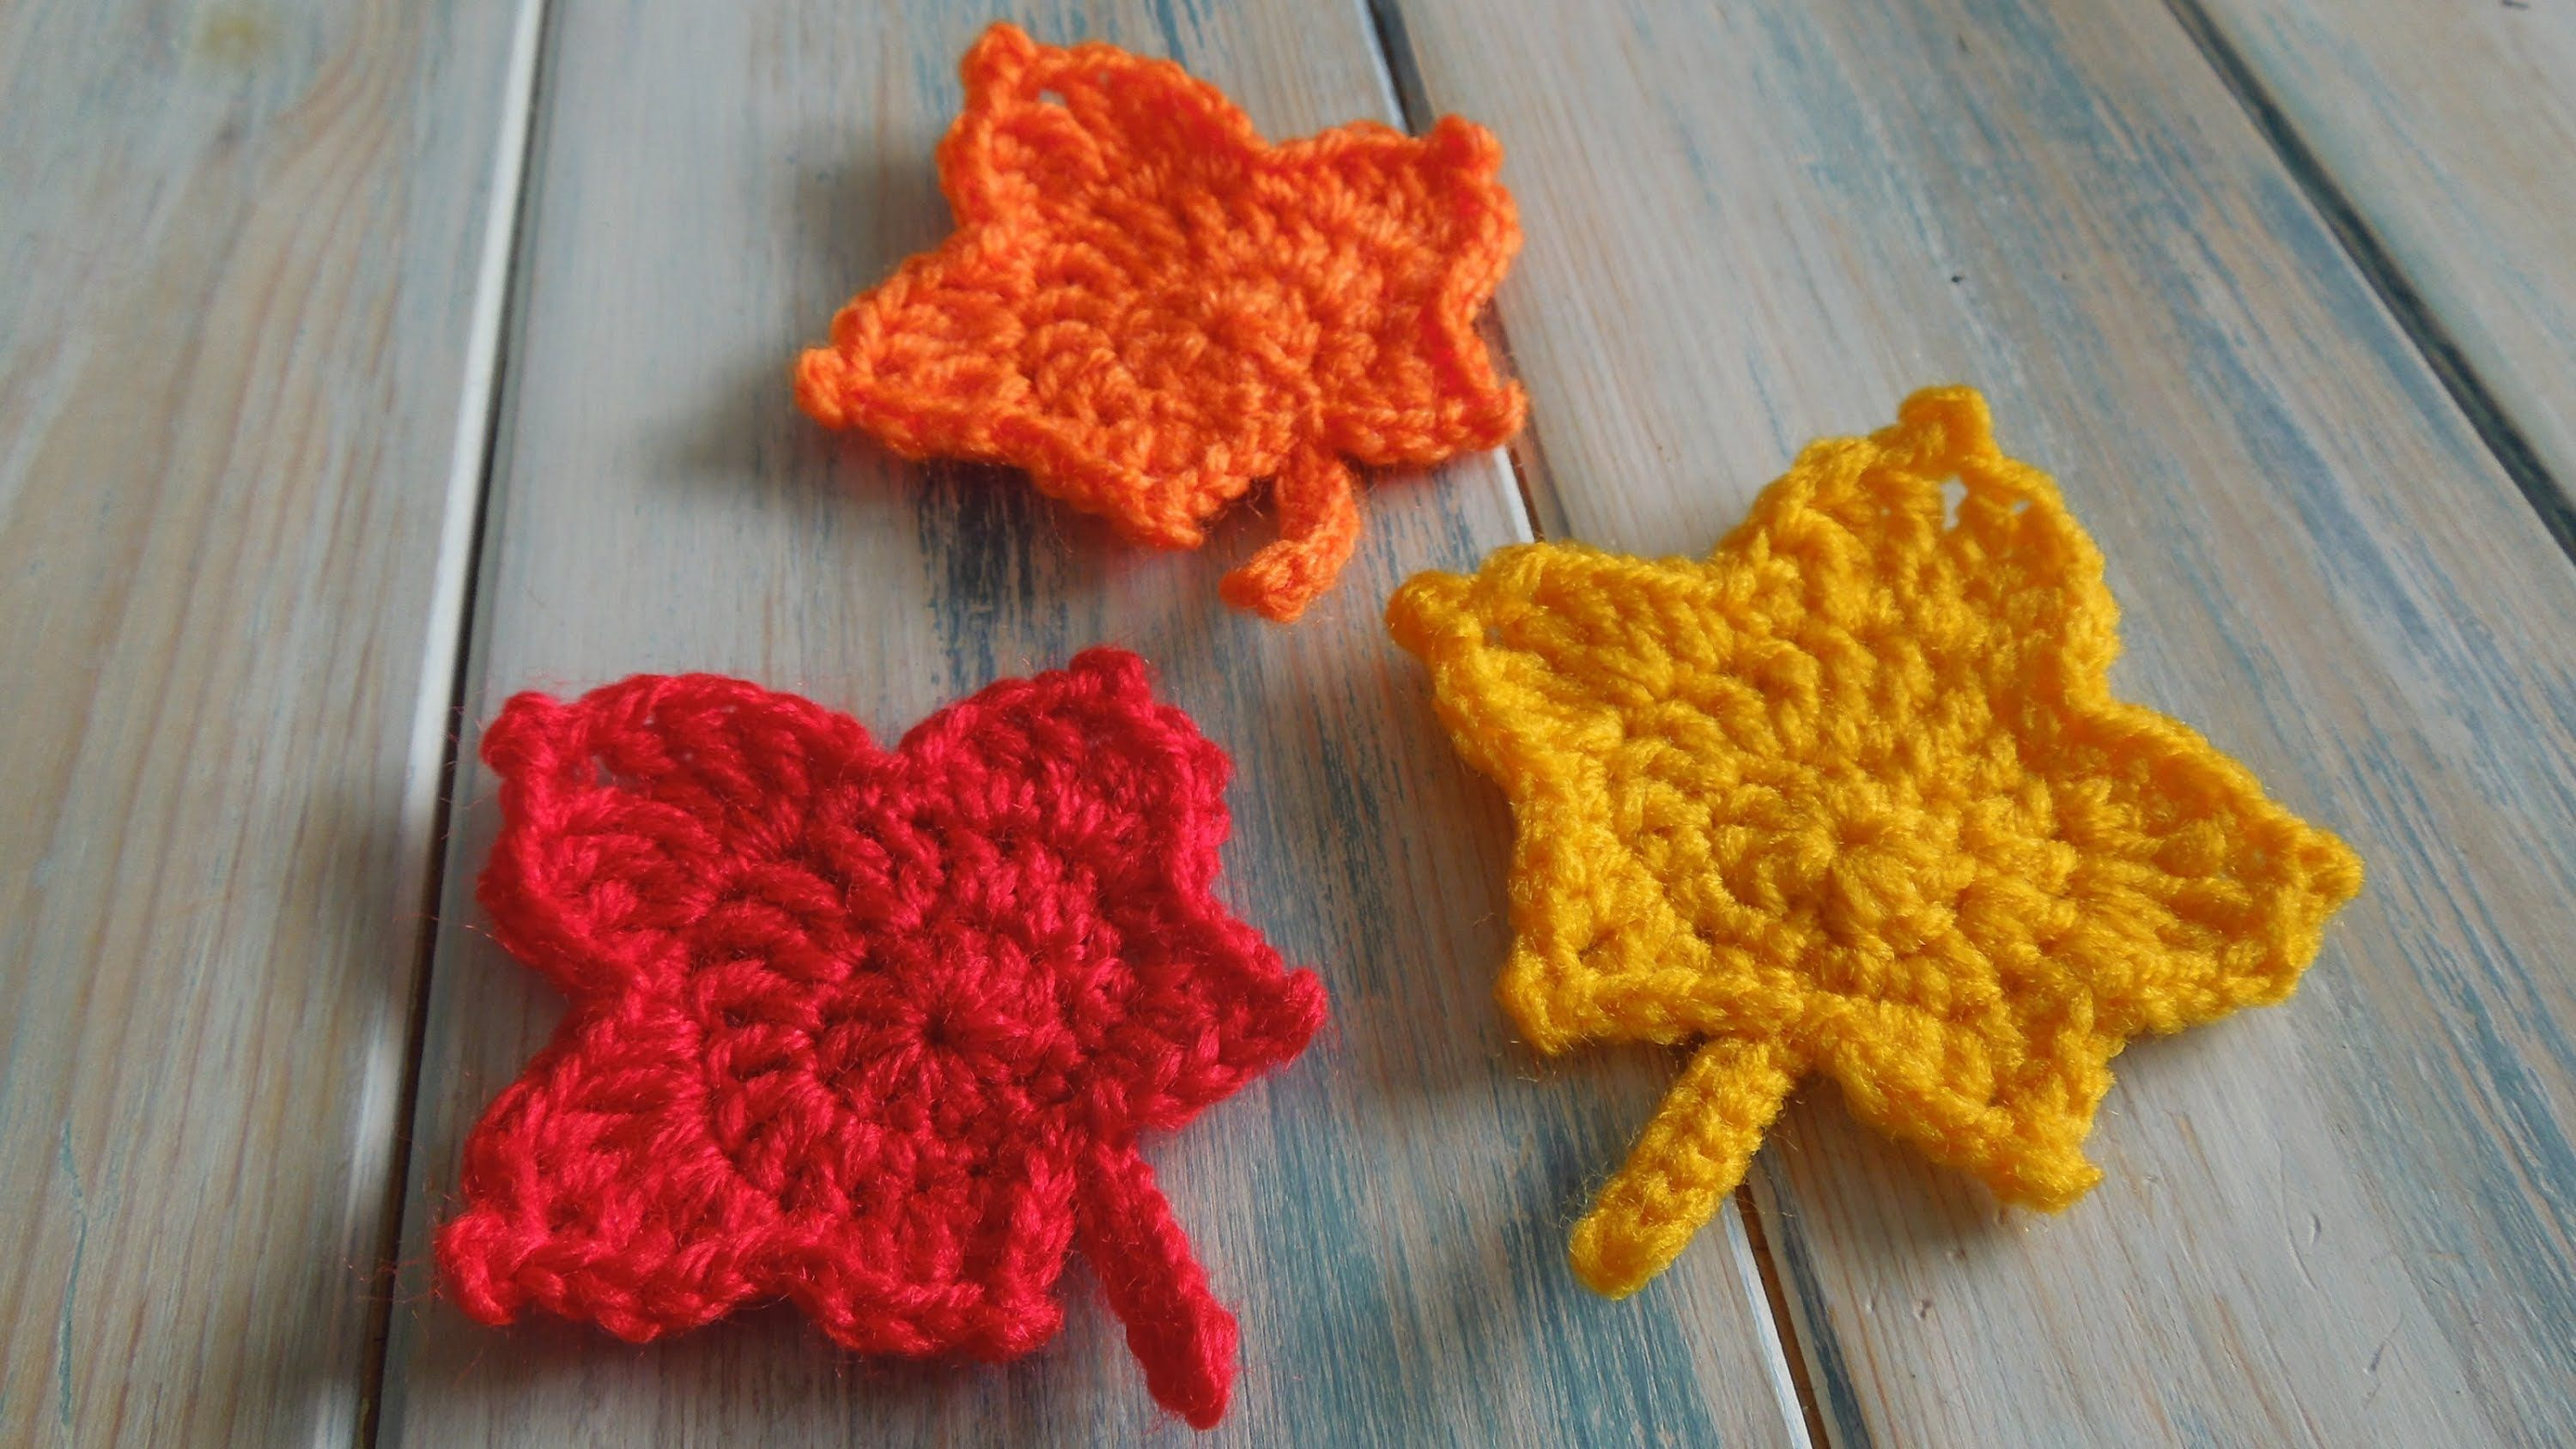 Crochet Leaf Pattern Video This Video Is An Extra Special Crochet Tutorial For My Canadian